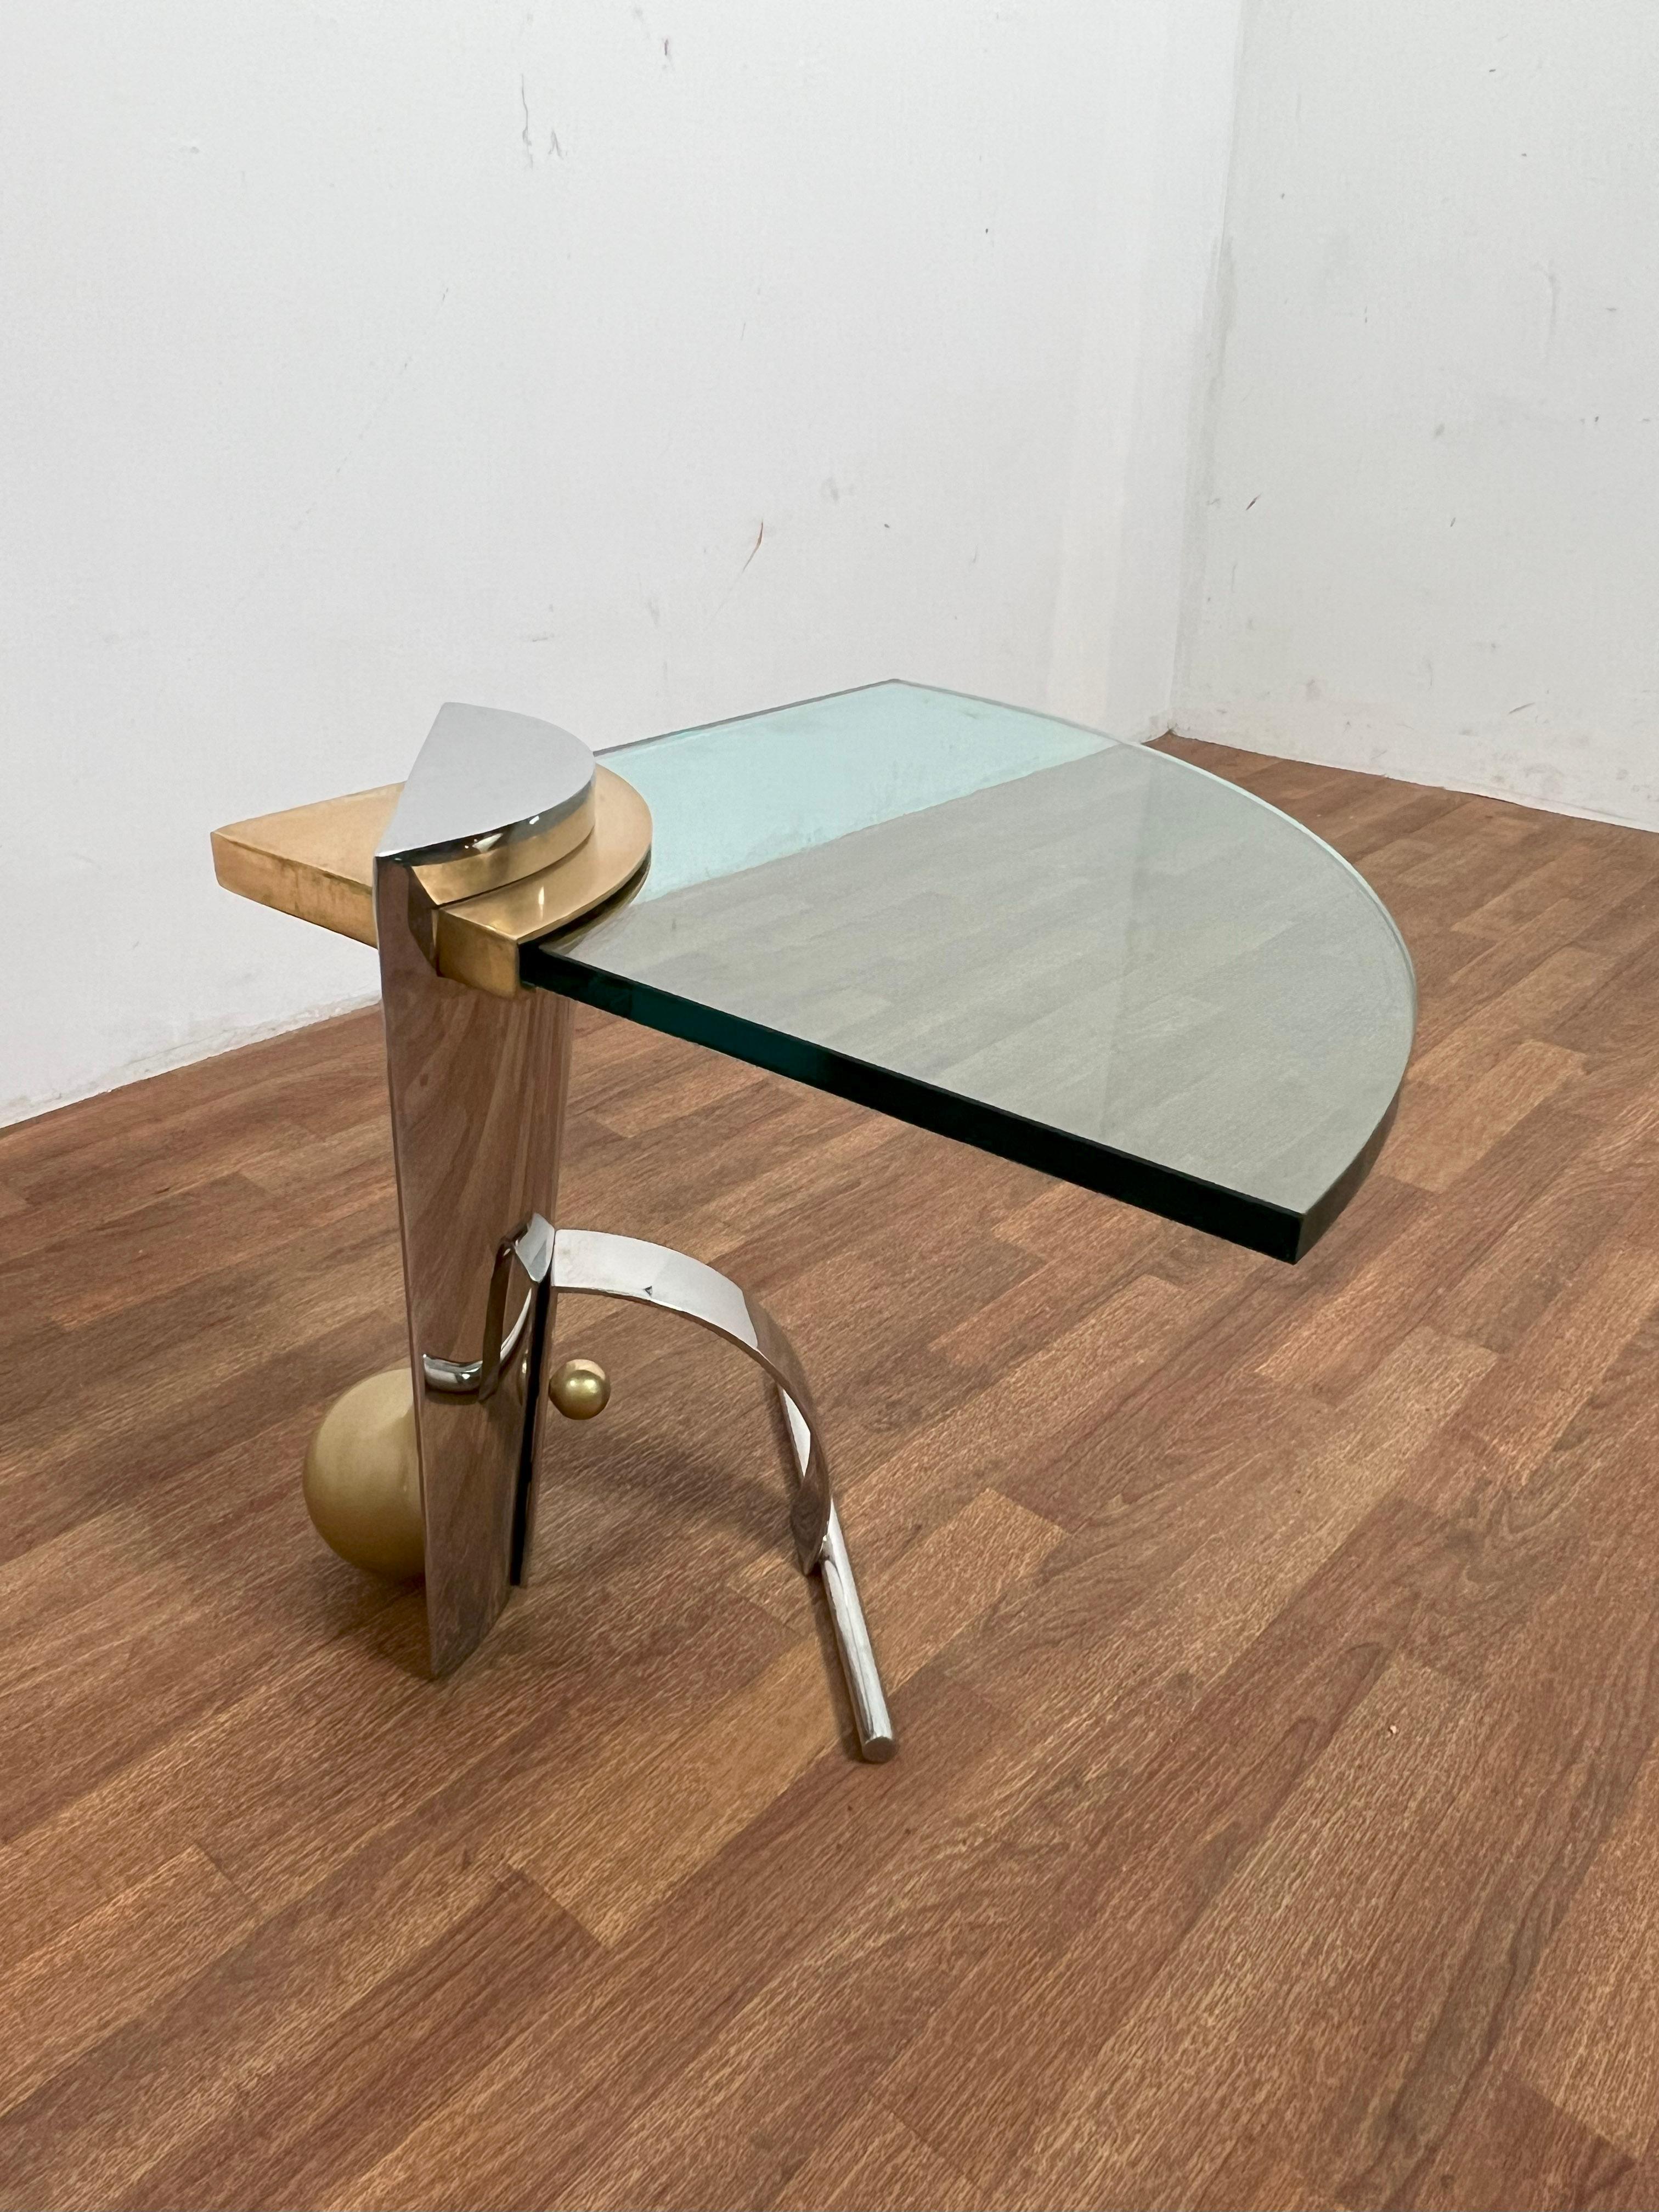 Late 20th Century Post Modern Cantilevered Side Table in Manner of Karl Springer C. 1980s